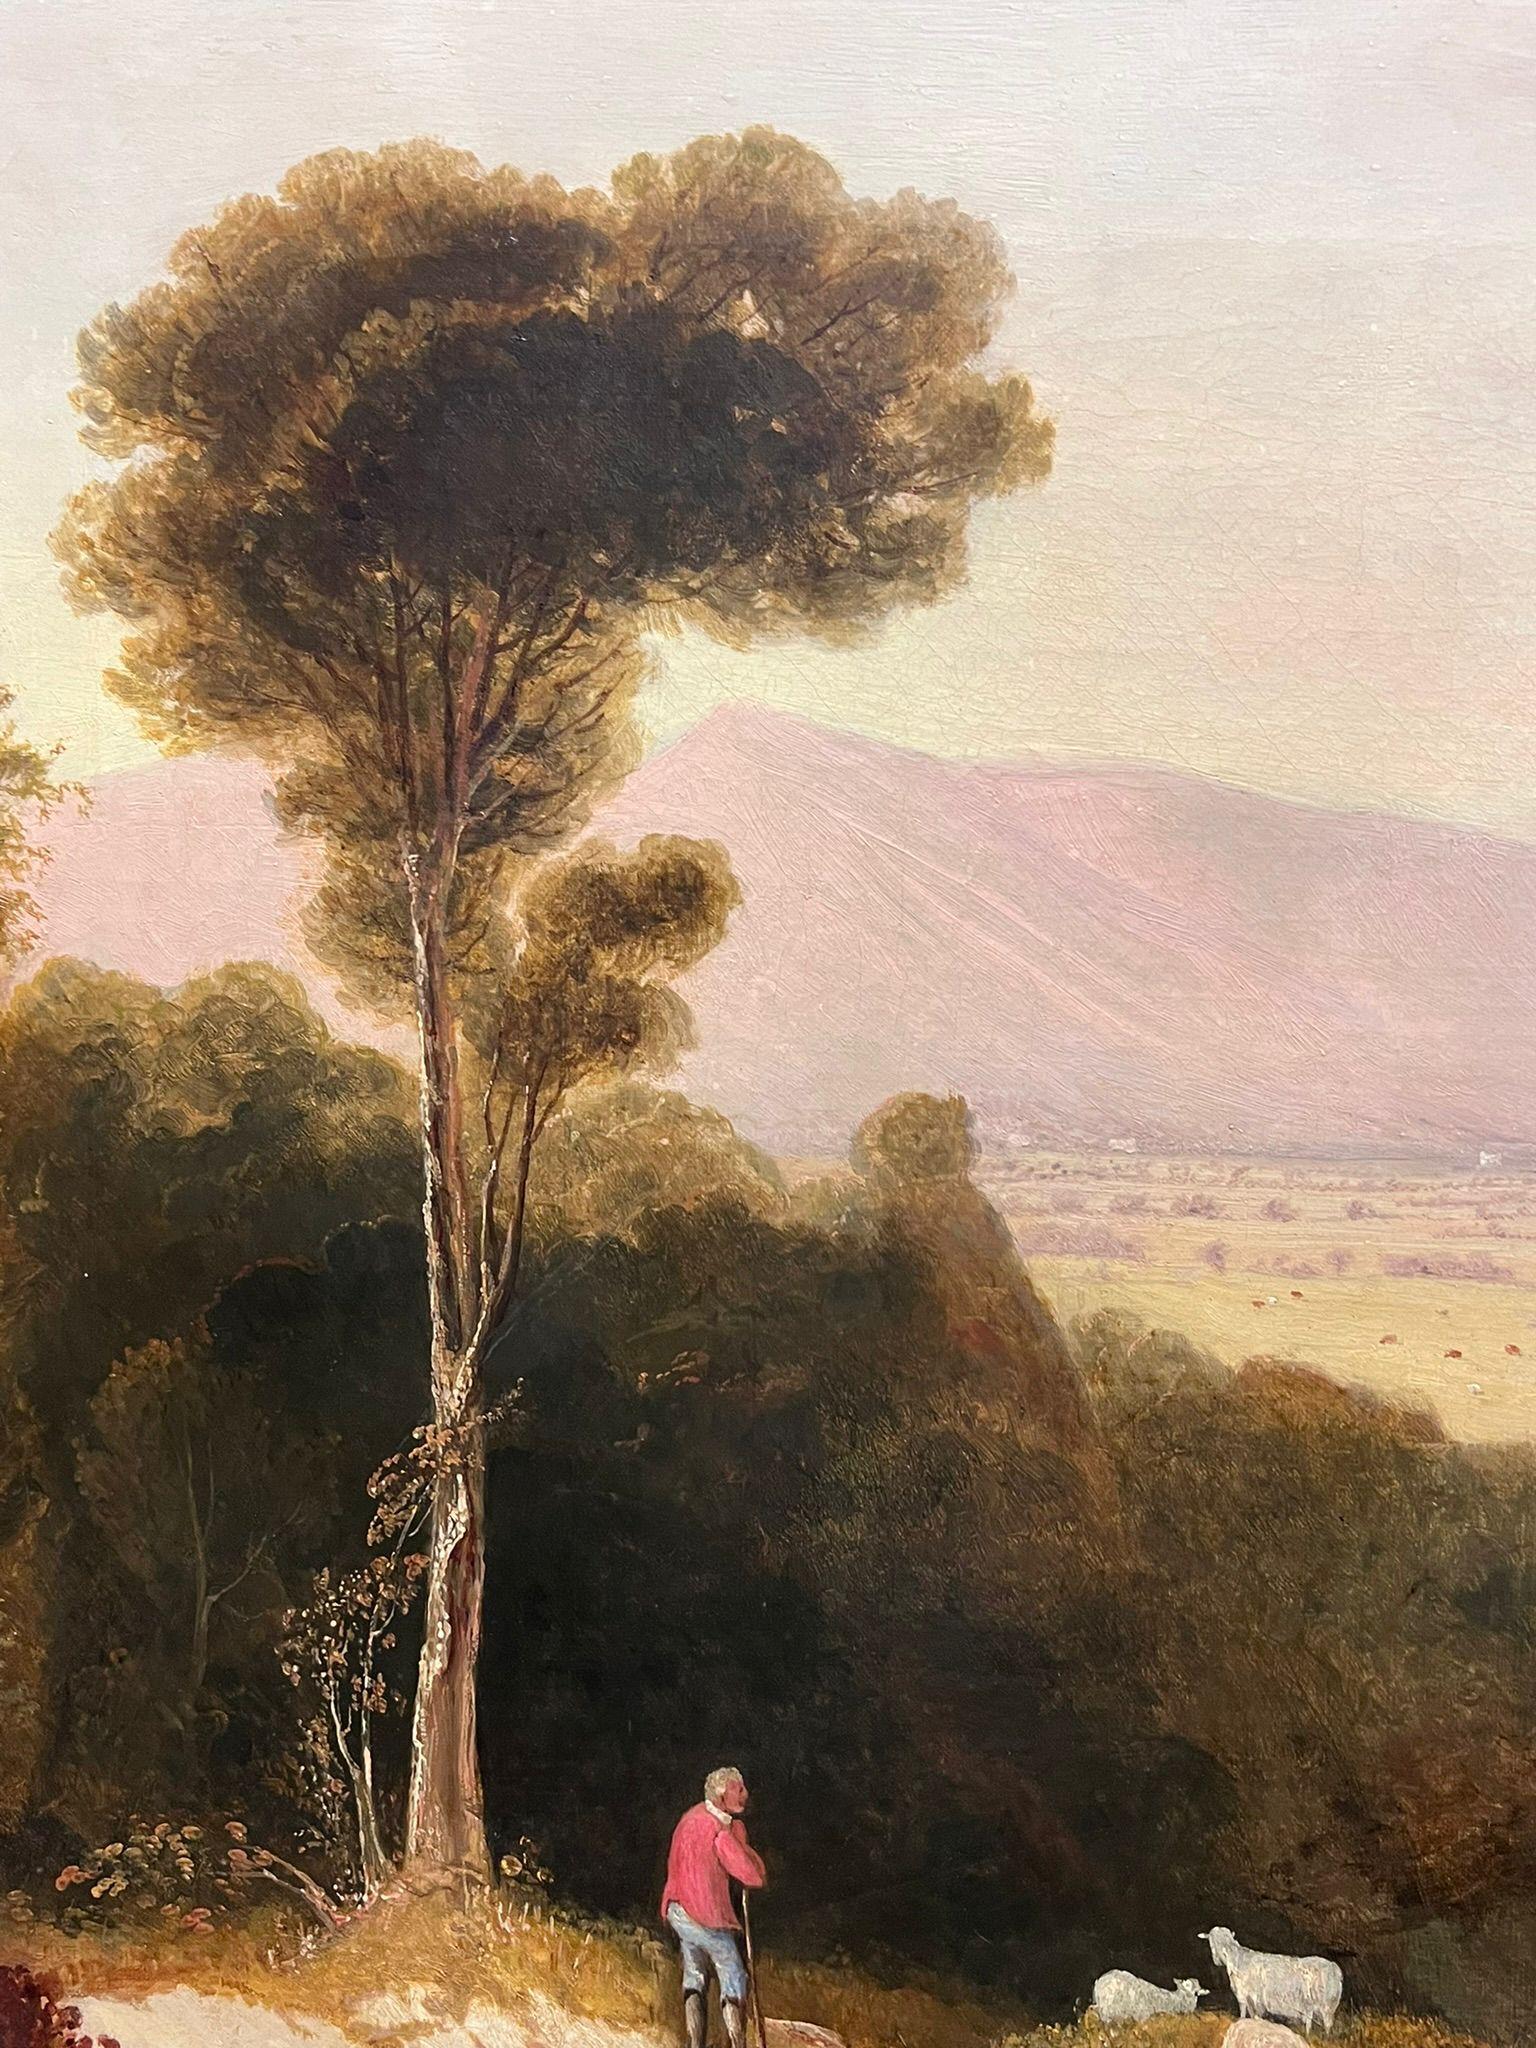 Figures before Far Reaching View
attributed to William Alfred Delamotte (English, 1775-1863)
oil on canvas, unframed
canvas : 24 x 36 inches
provenance: private collection, England
condition: very good and sound condition 